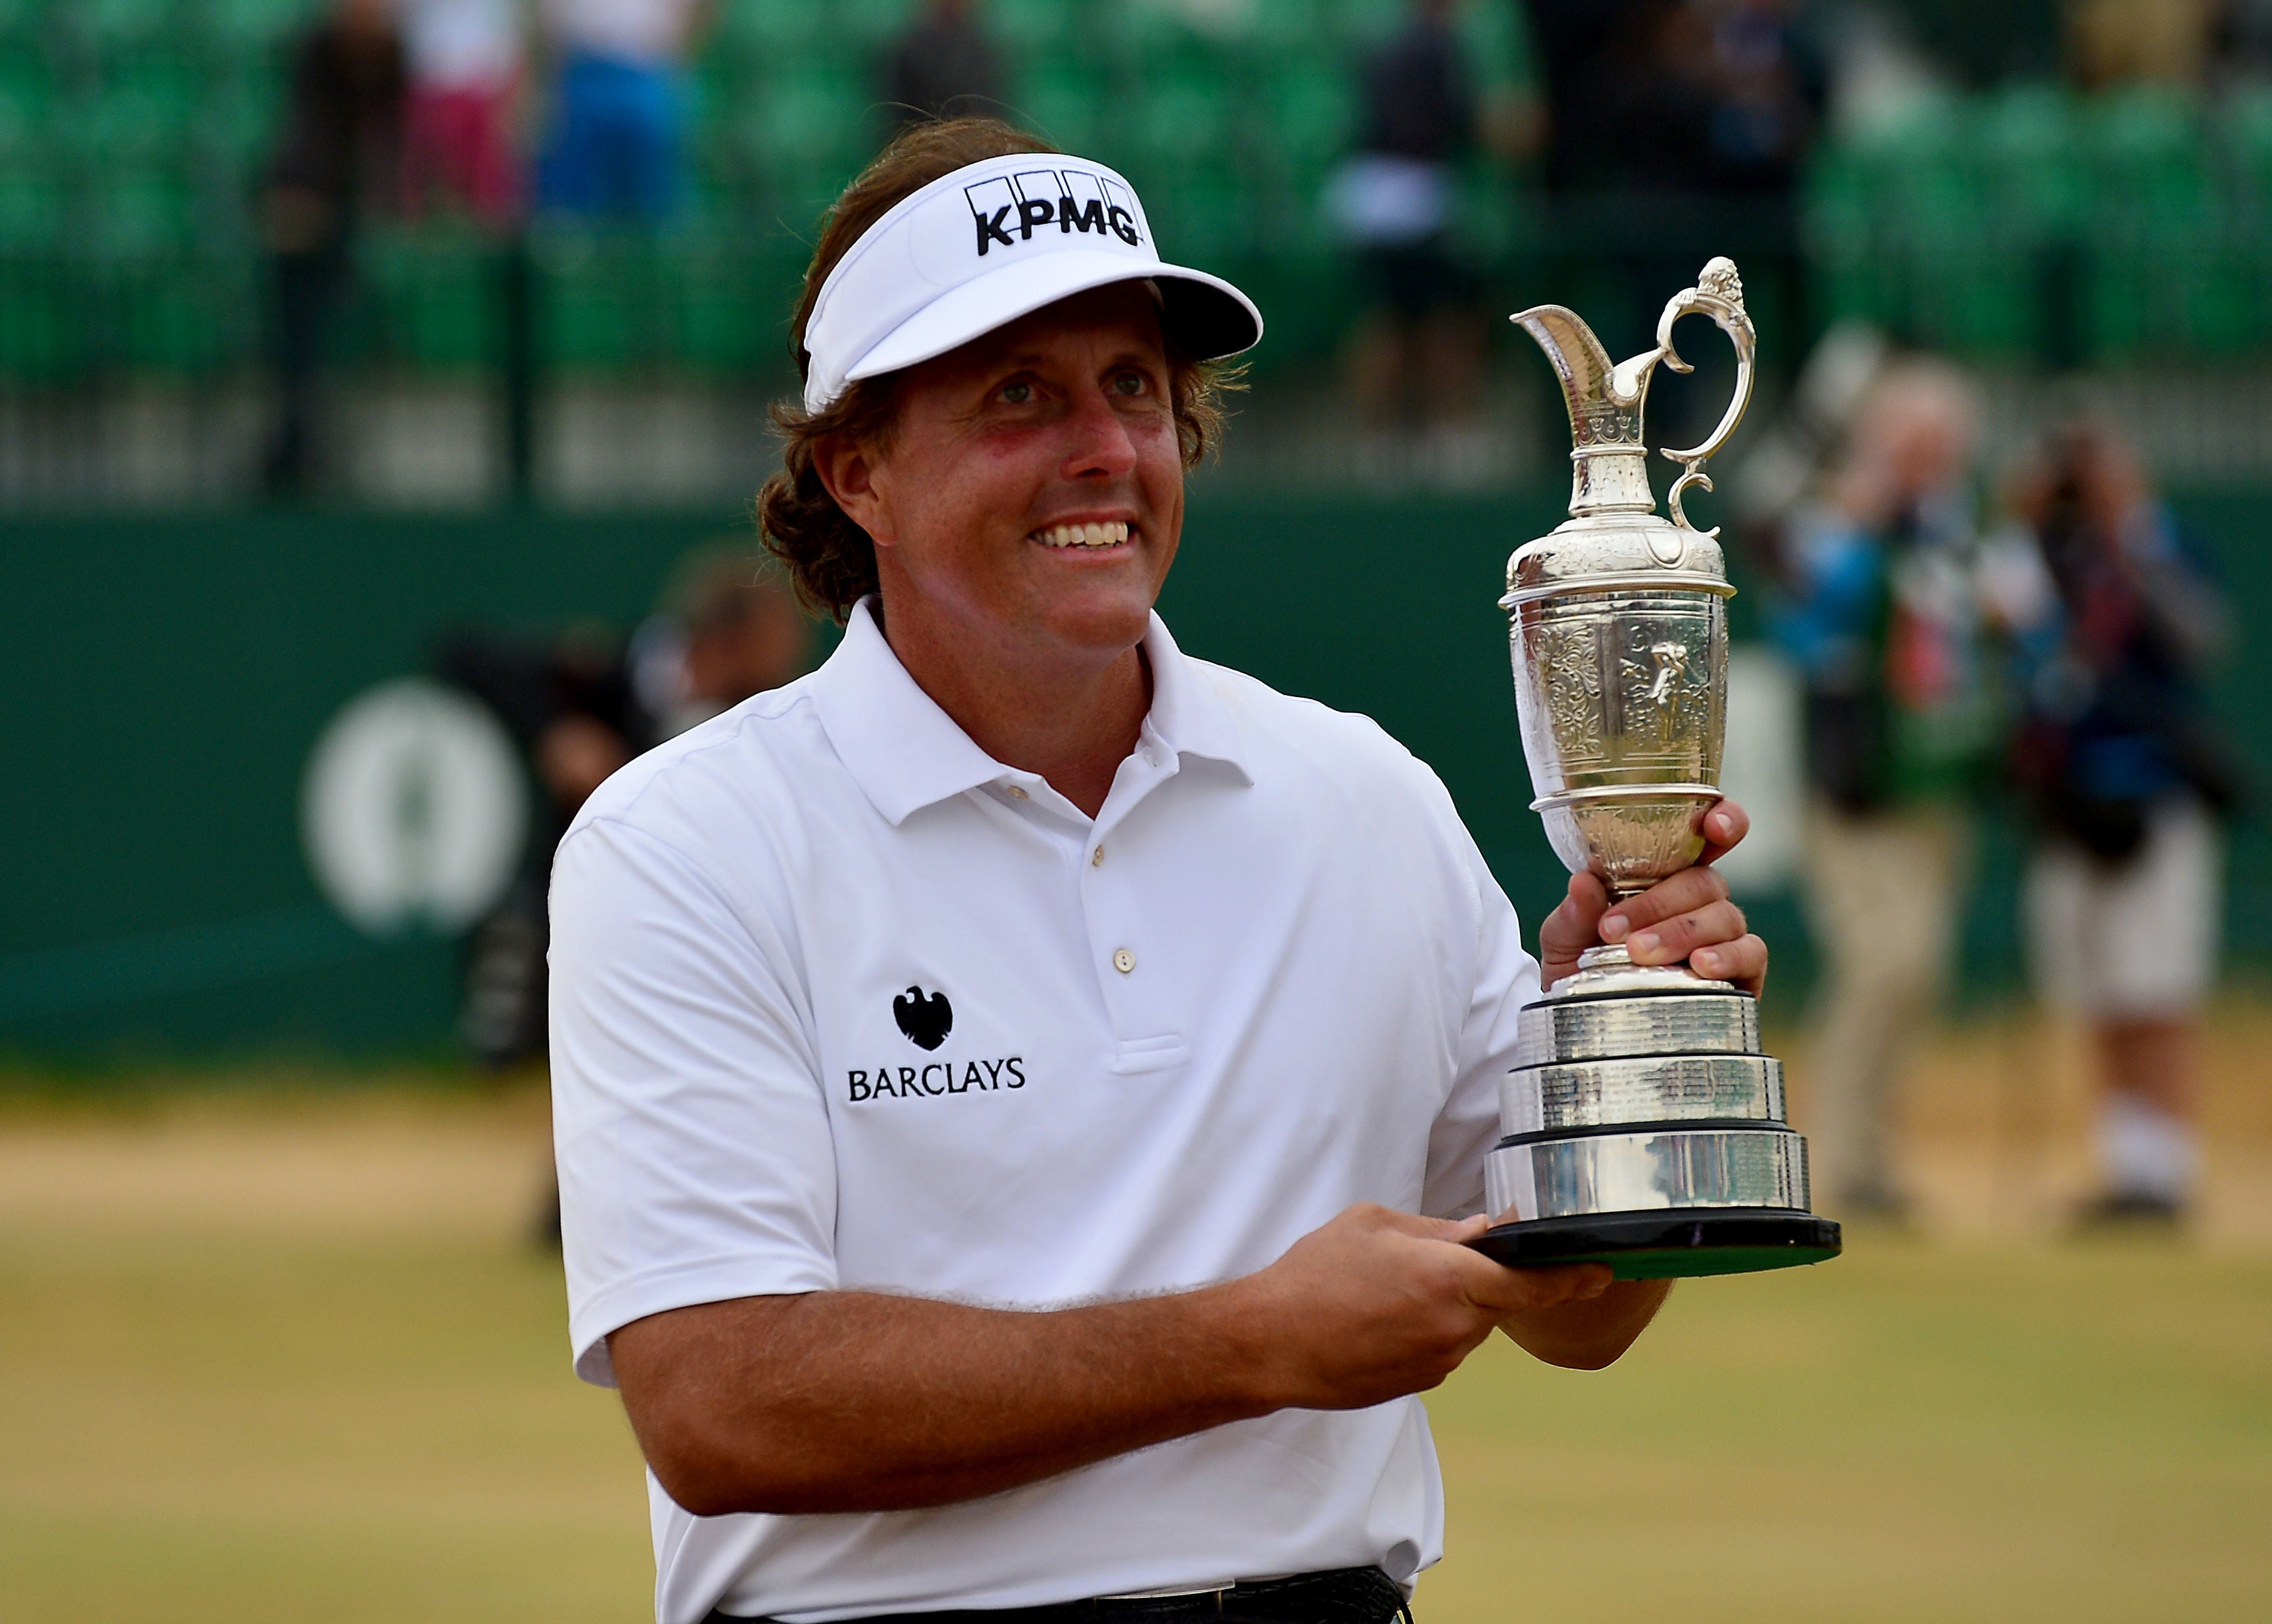 Phil Mickelson celebrated with the Claret Jug after winning the 2013 Open Championship (Owen Humphreys/PA)